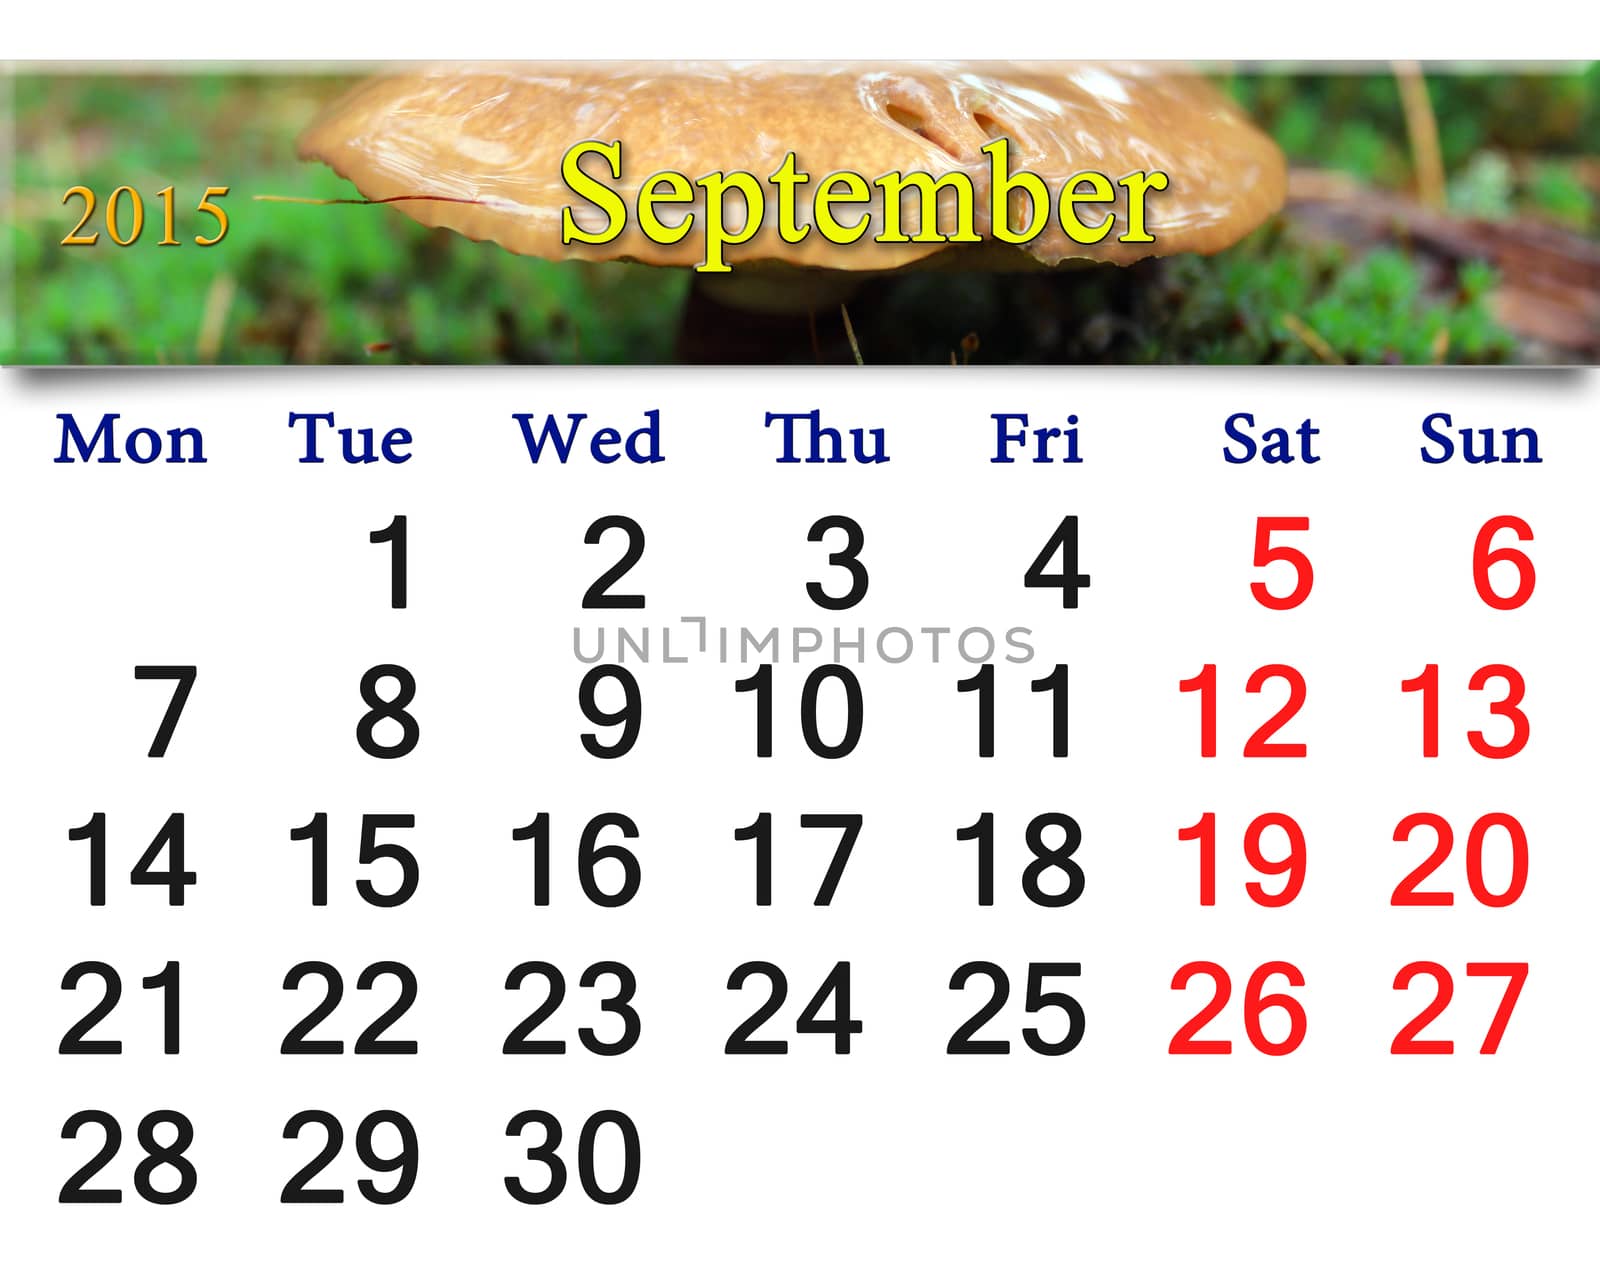 calendar for the September of 2014 on the background of mushrooms under a birch